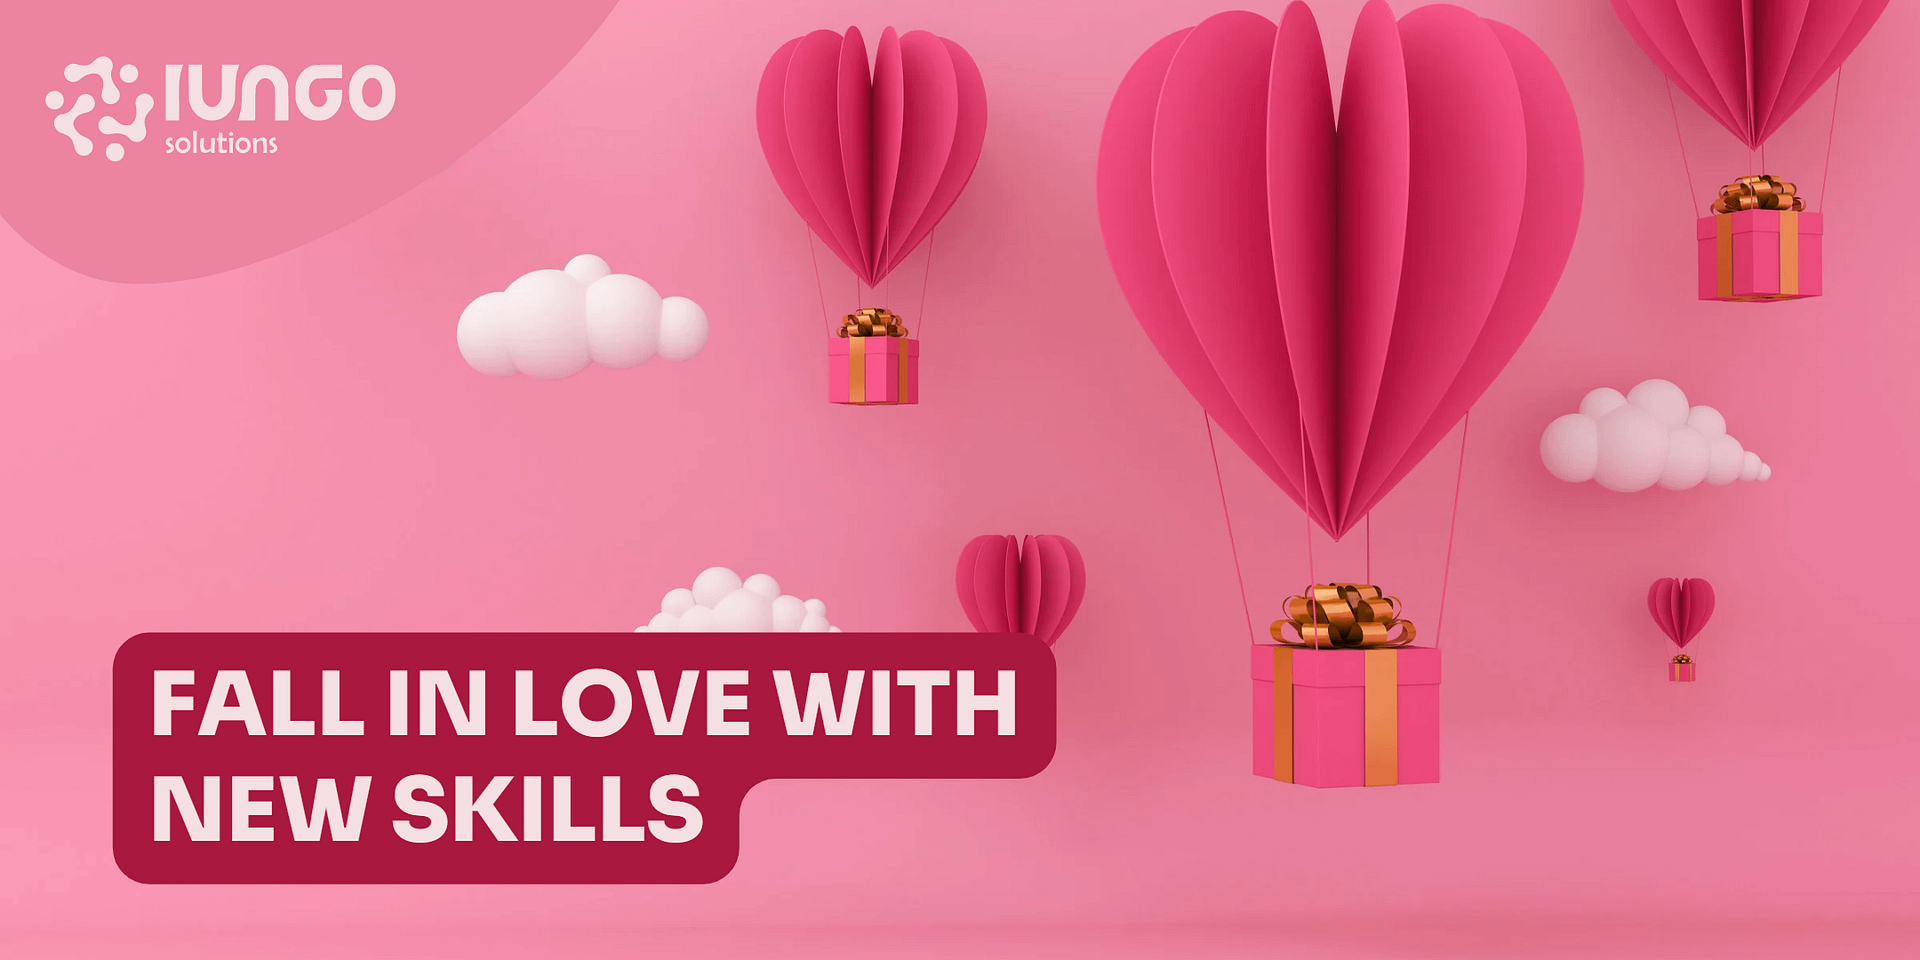 A Guide To Falling in Love with New Skills